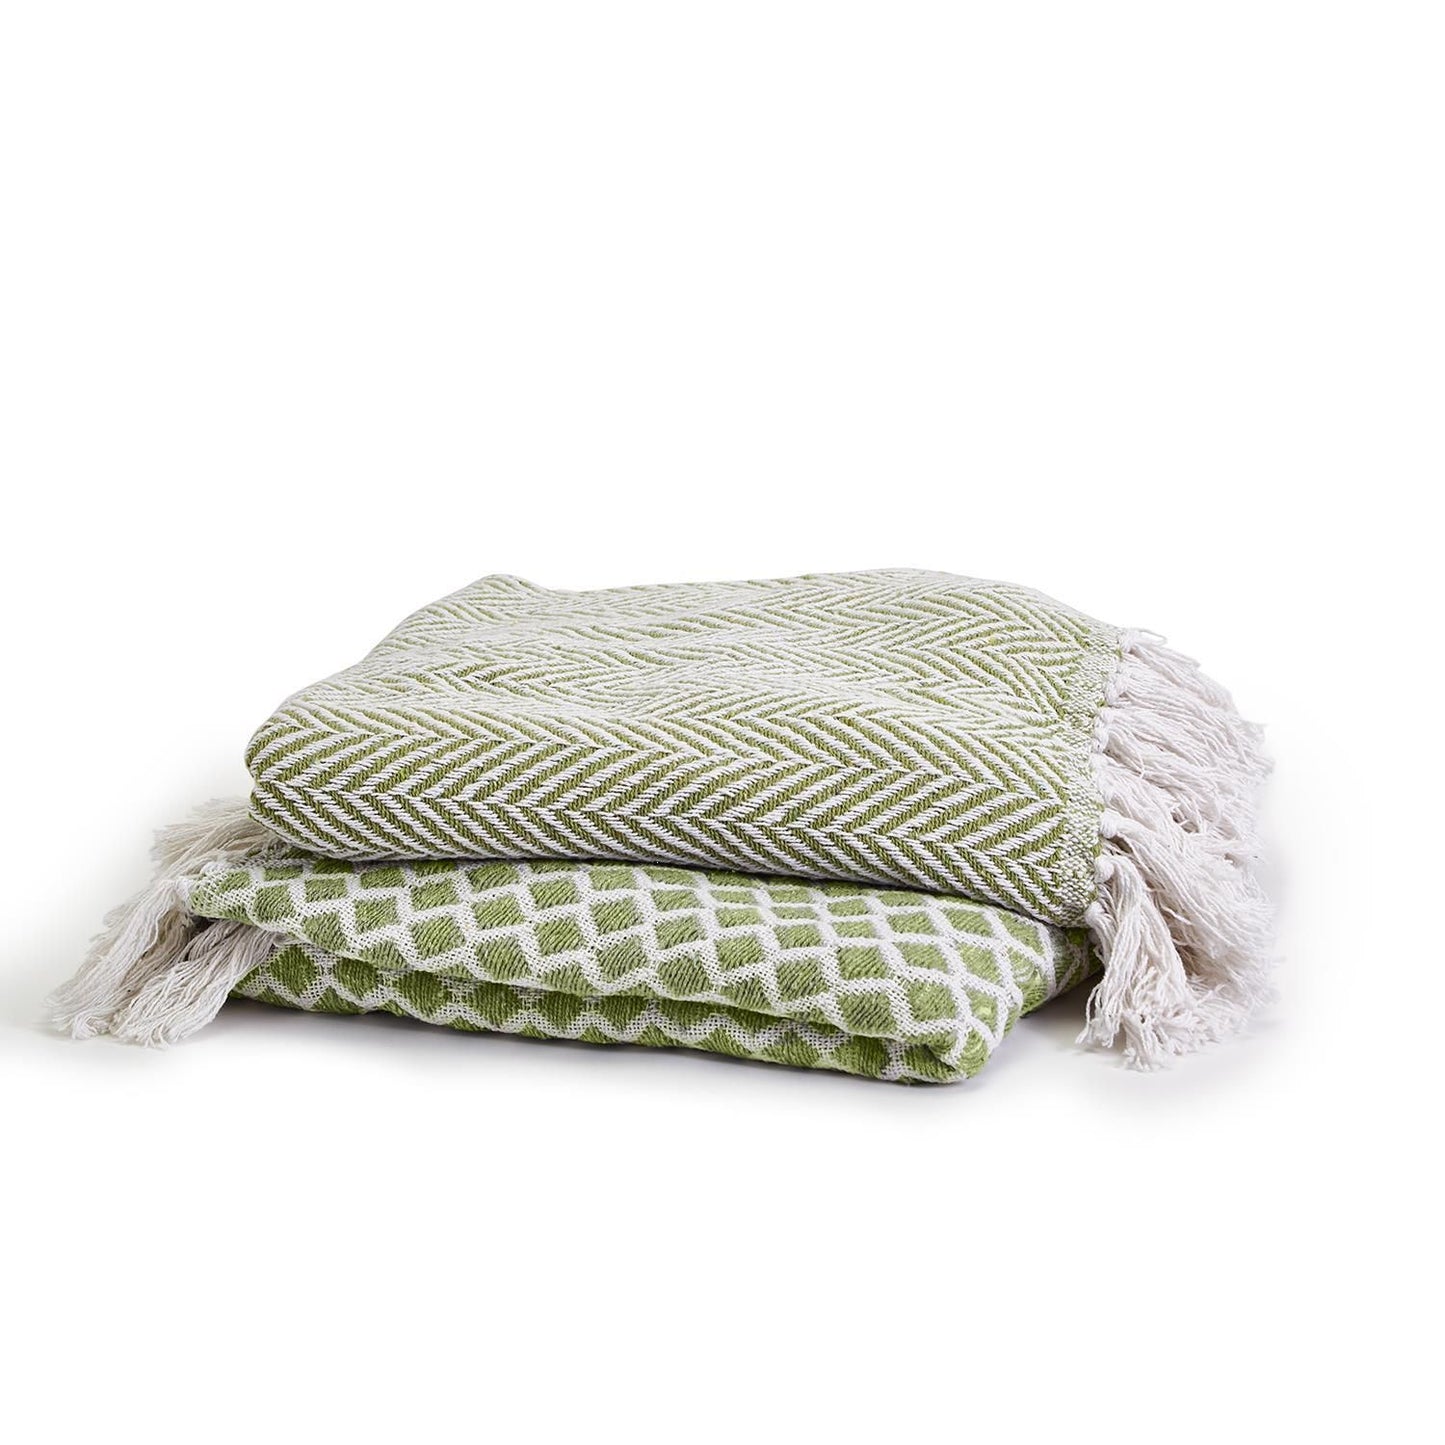 Two's Company Countryside Green Throw, Assortment of 2 Patterns